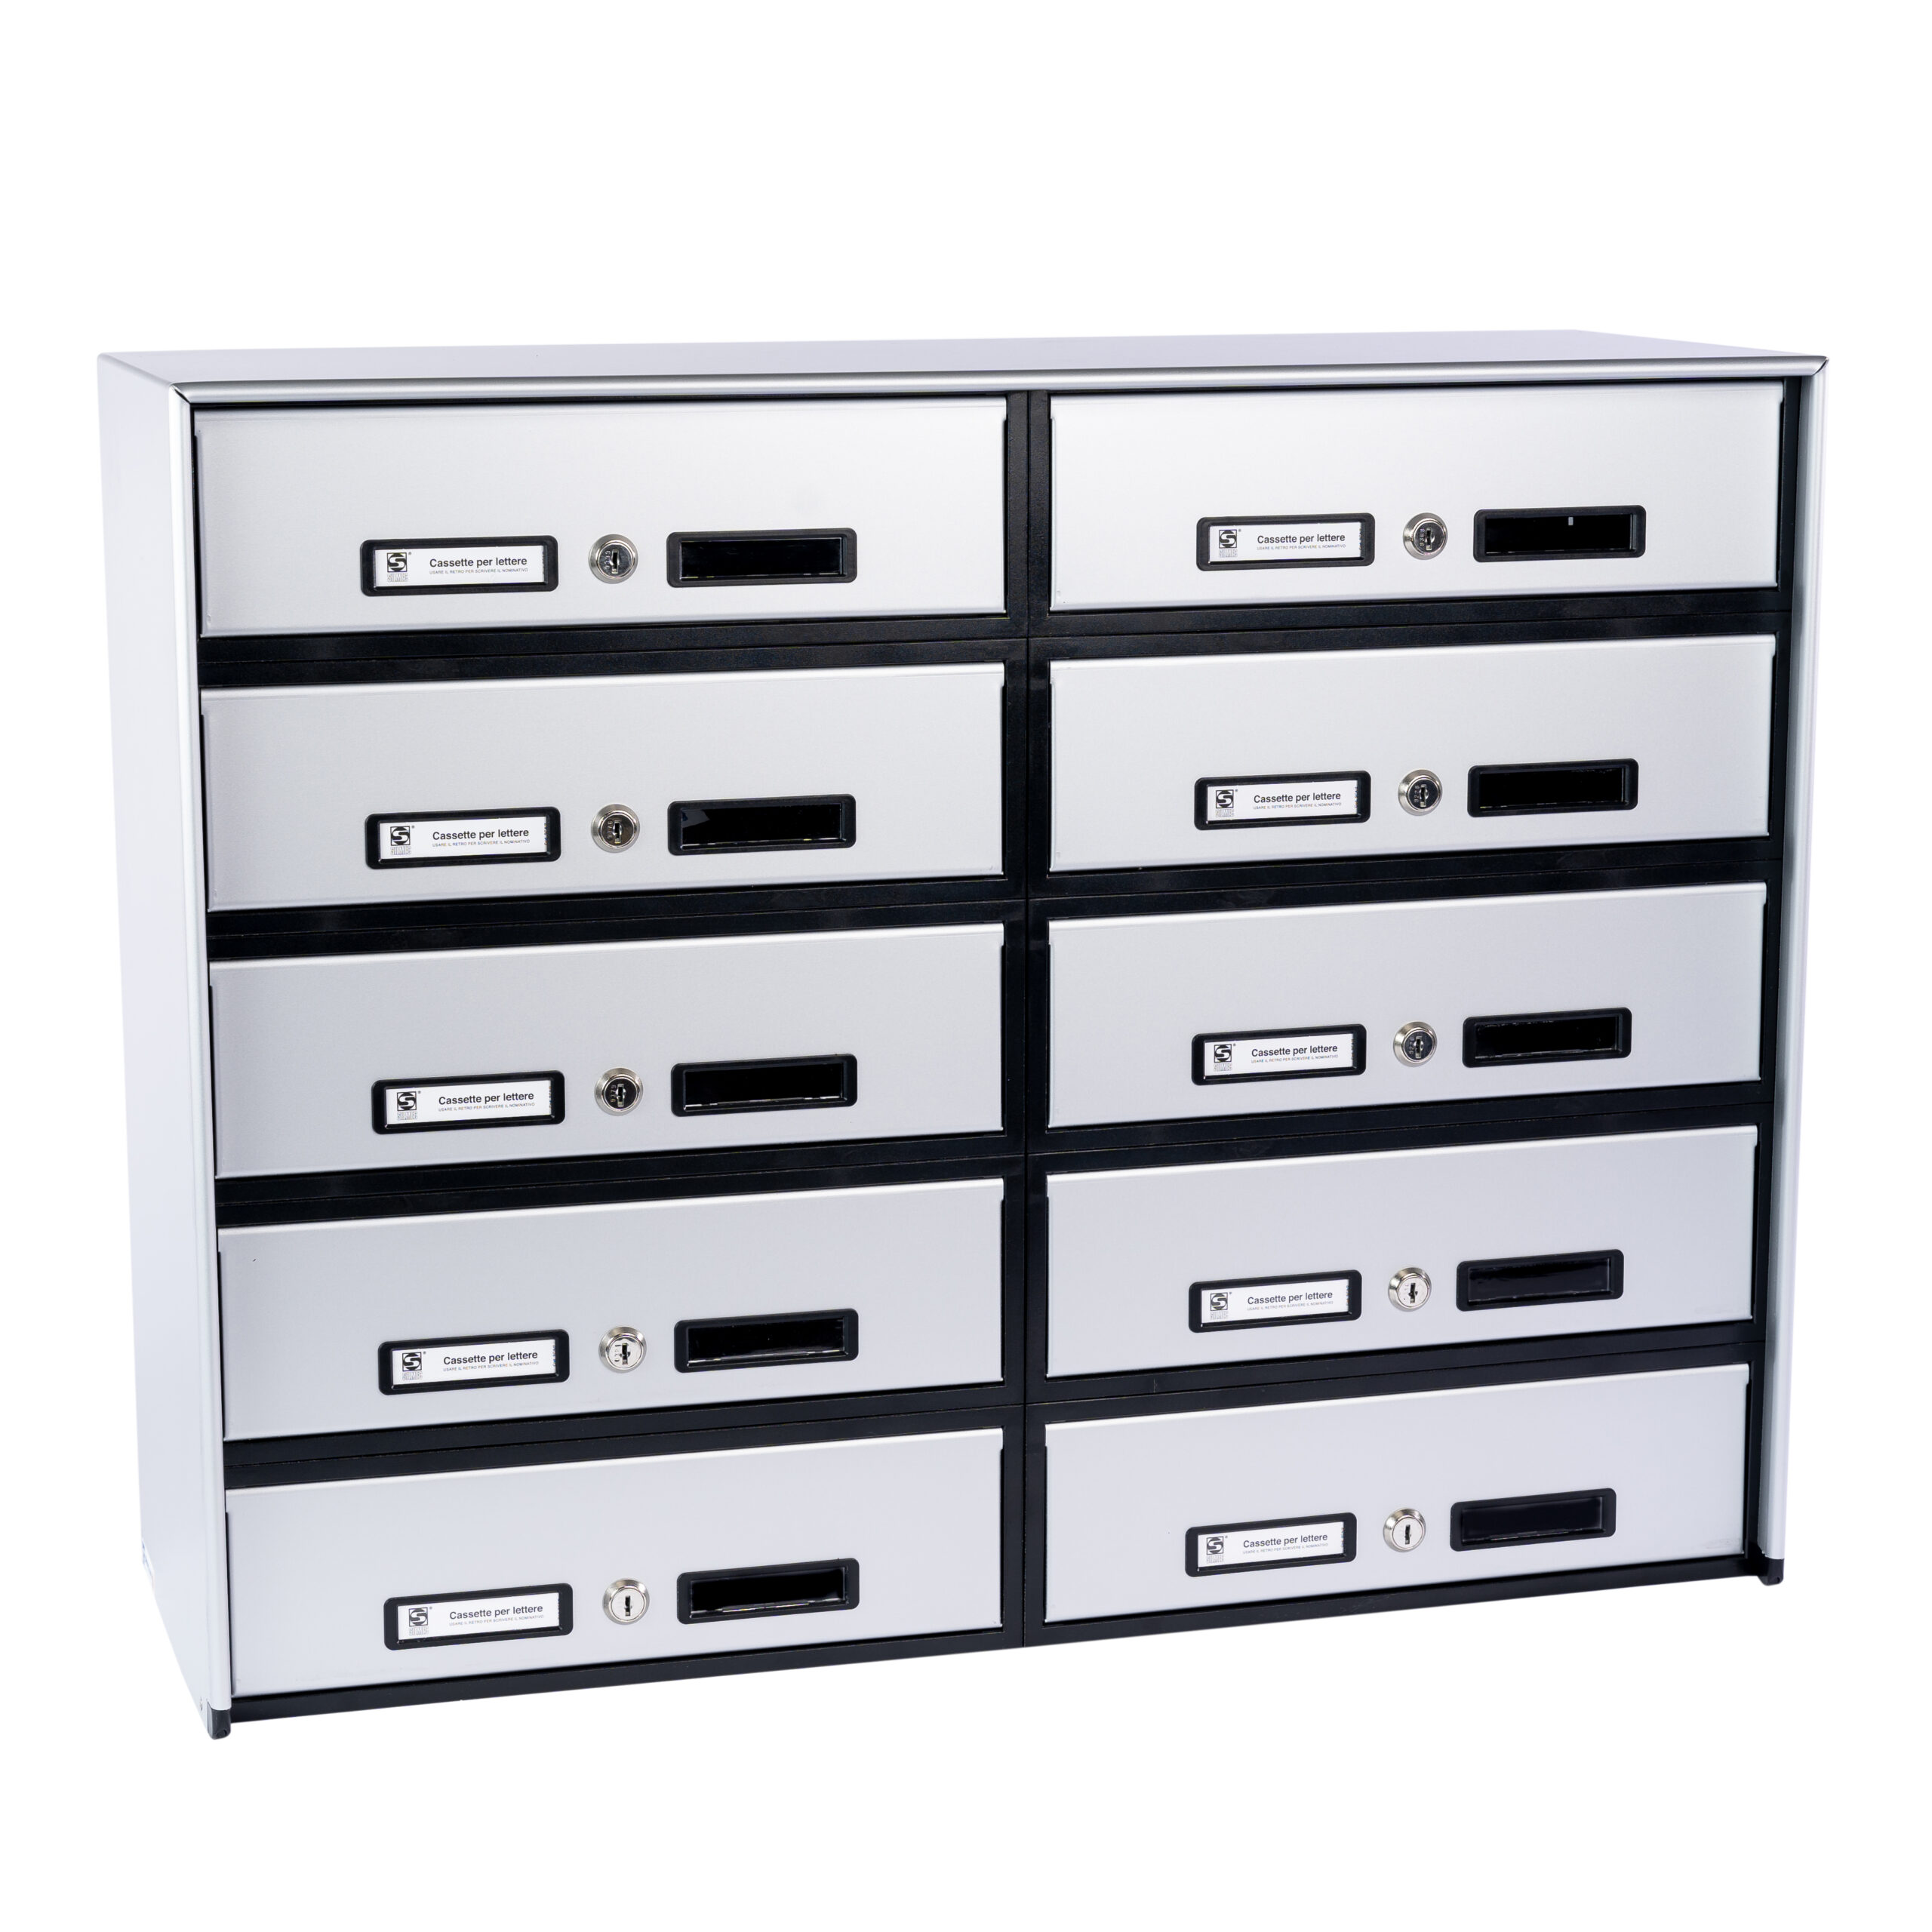 SC6 standard modular letterbox units with rear mail collection – 10 mailboxes